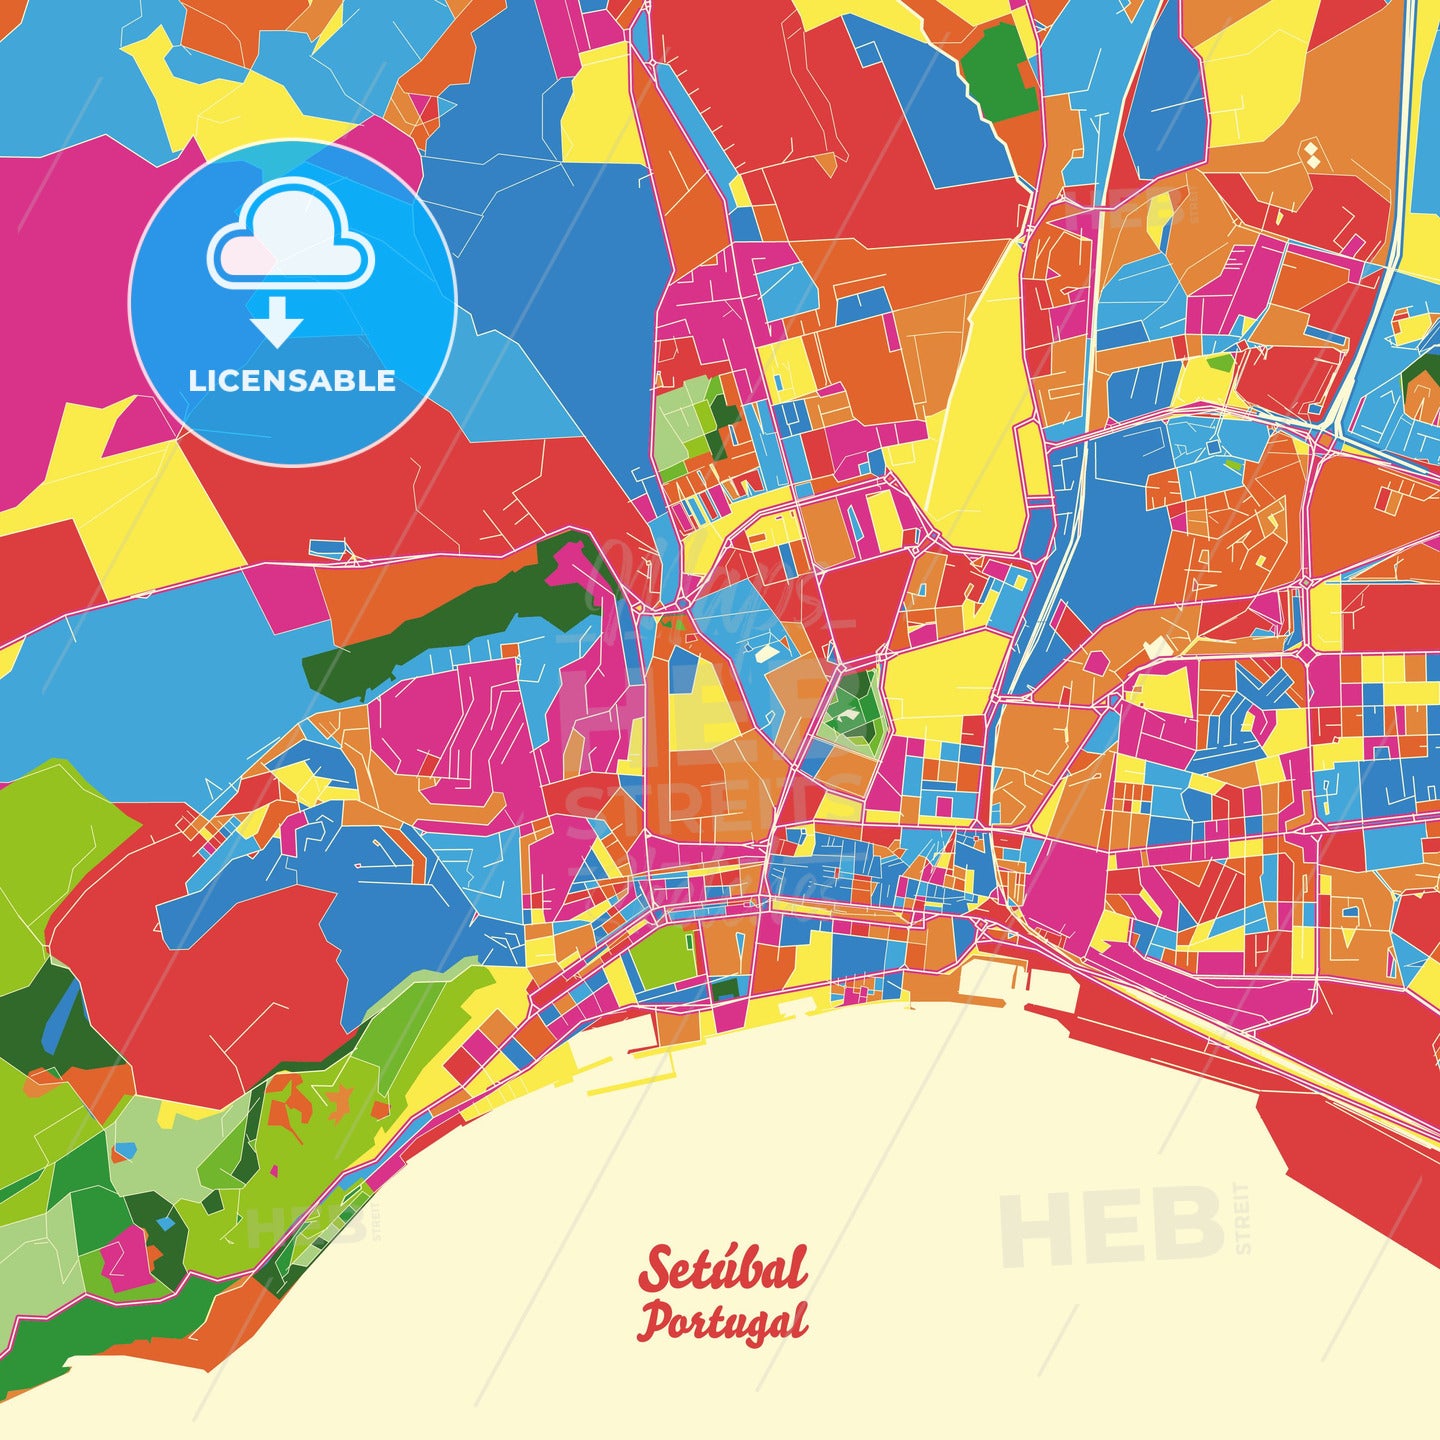 Setúbal, Portugal Crazy Colorful Street Map Poster Template - HEBSTREITS Sketches